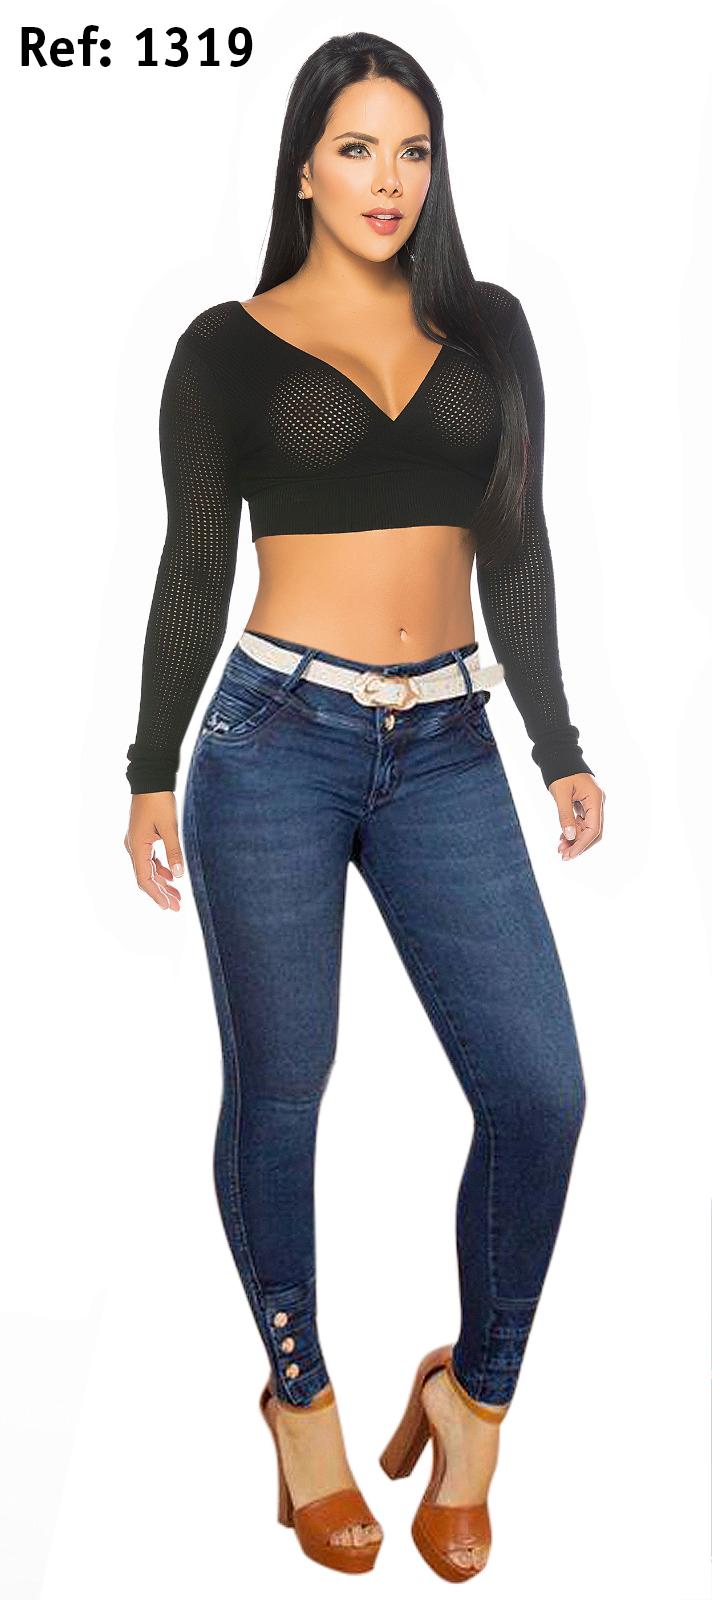 Jeans Perfect figure For Lady, Colombian Design that lifts and enhances the Tail